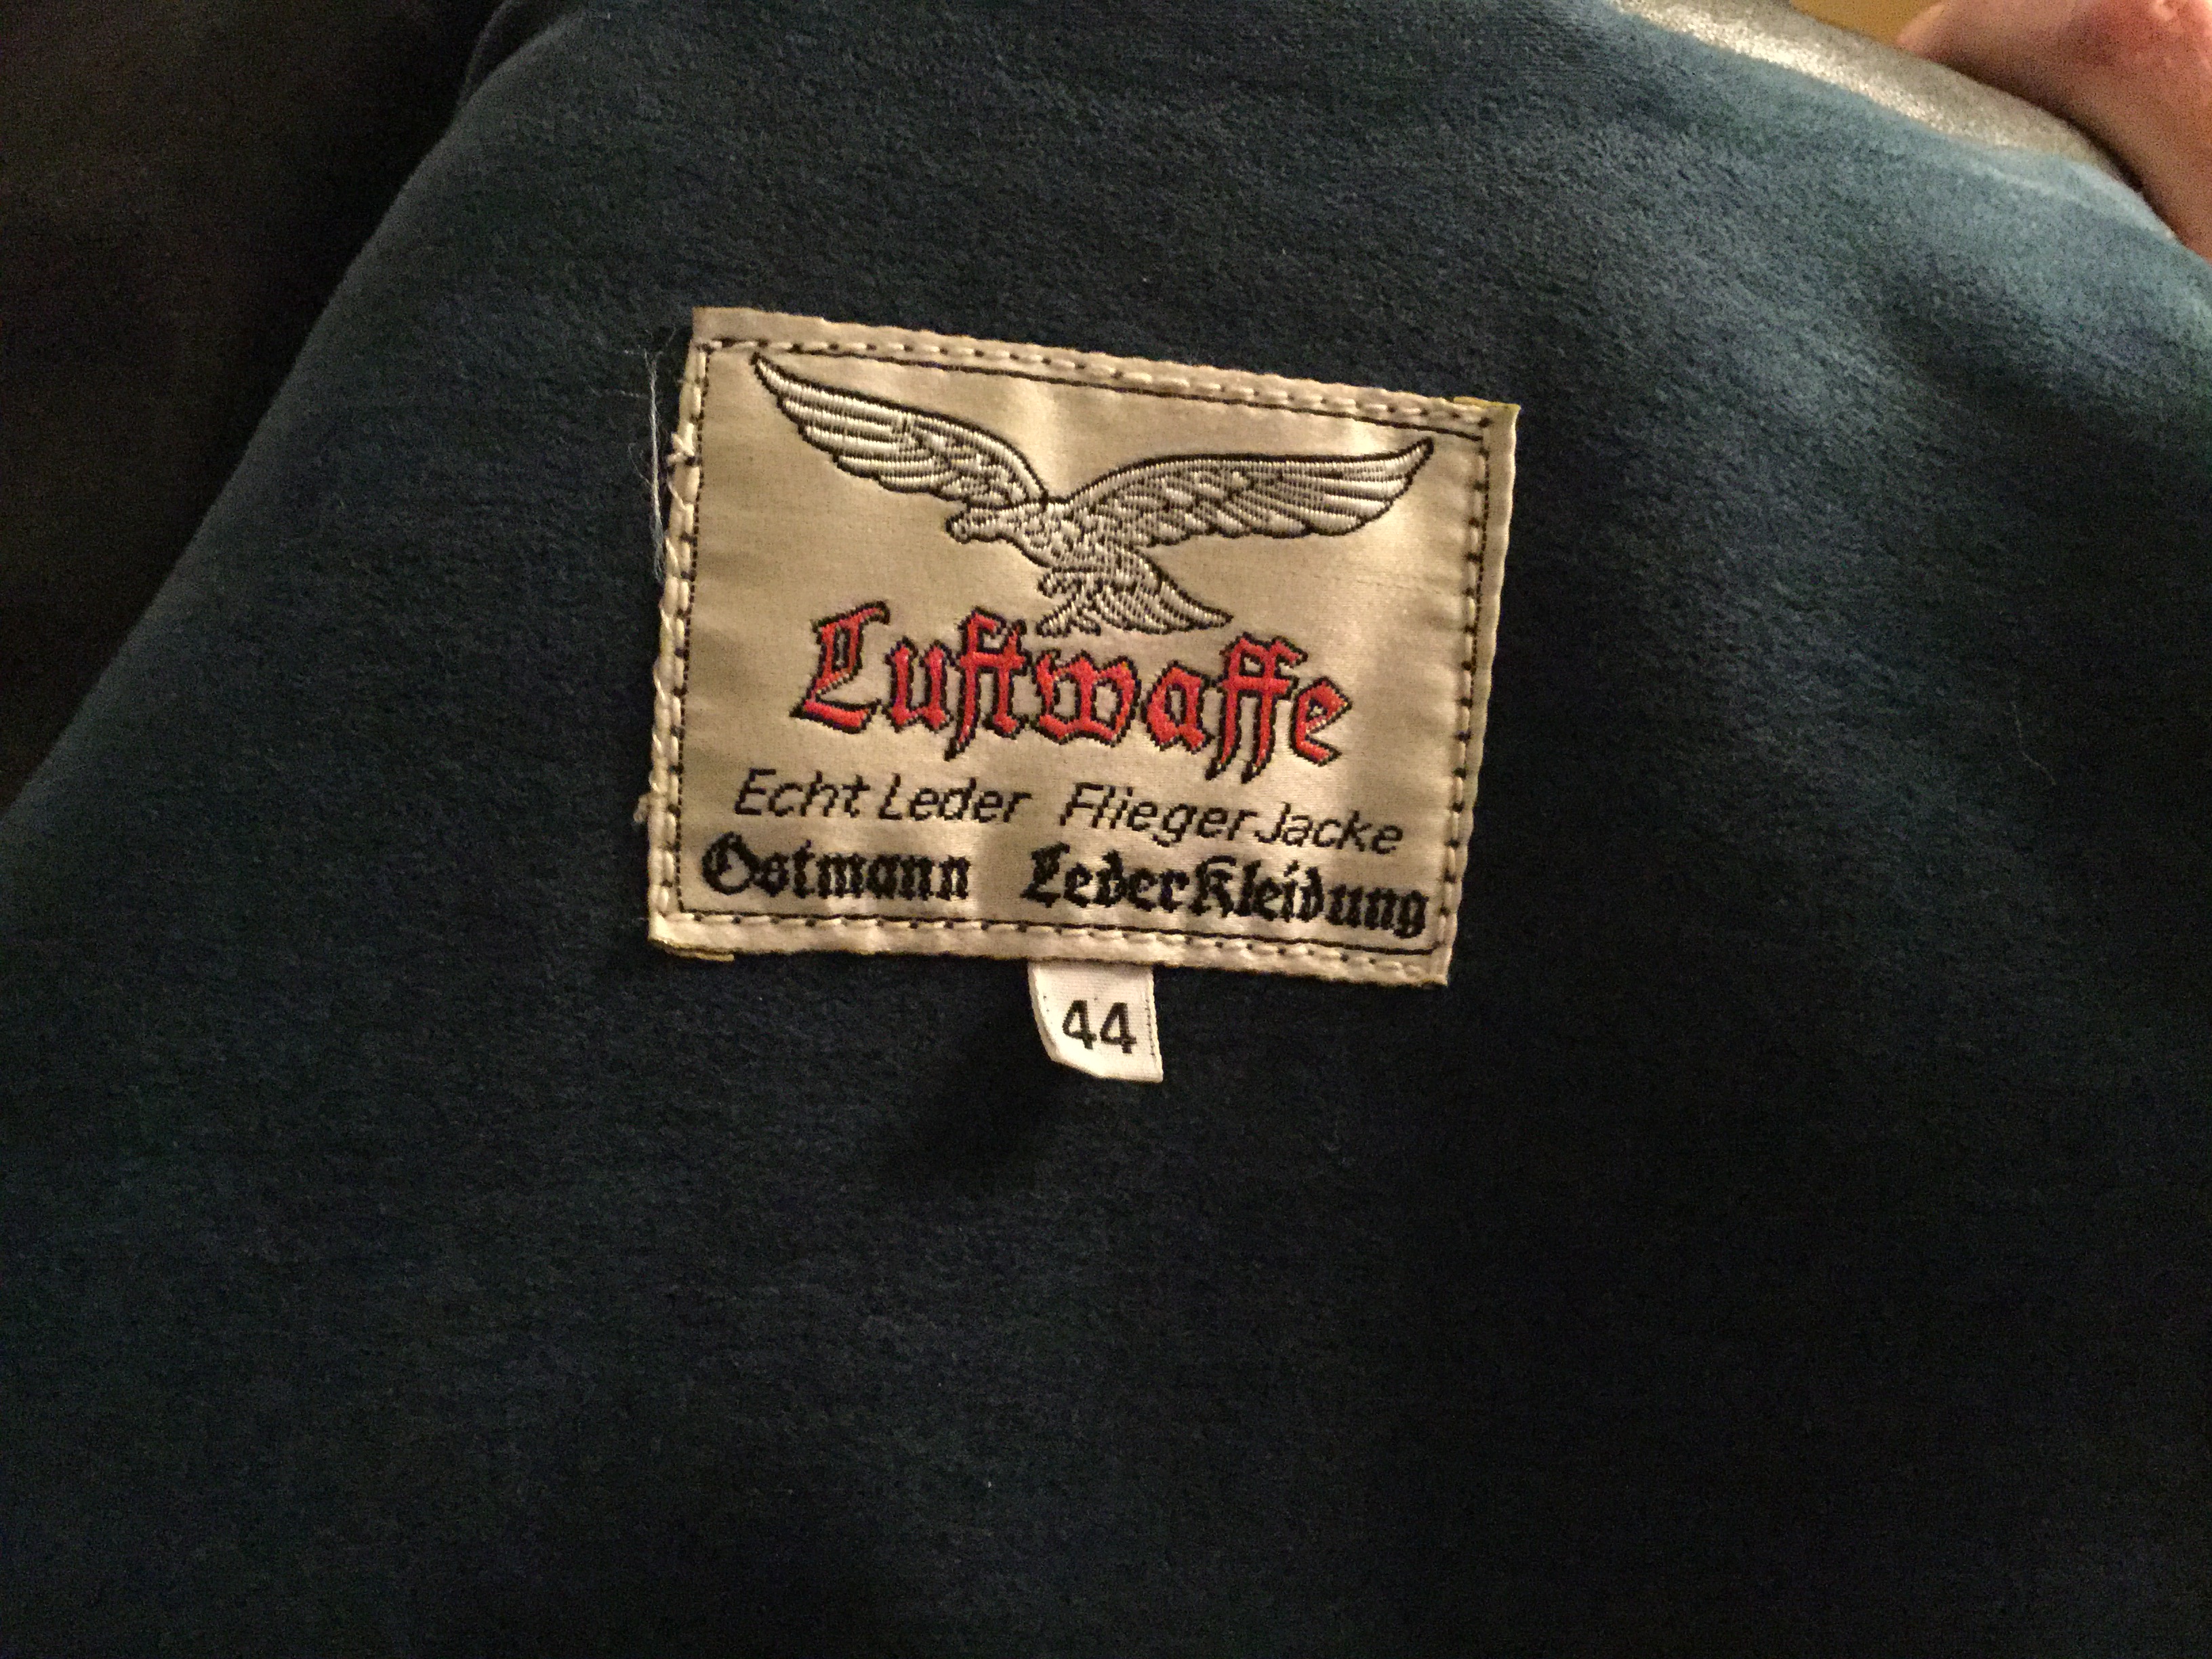 When did Eastman change their Luftwaffe label? | The Fedora Lounge